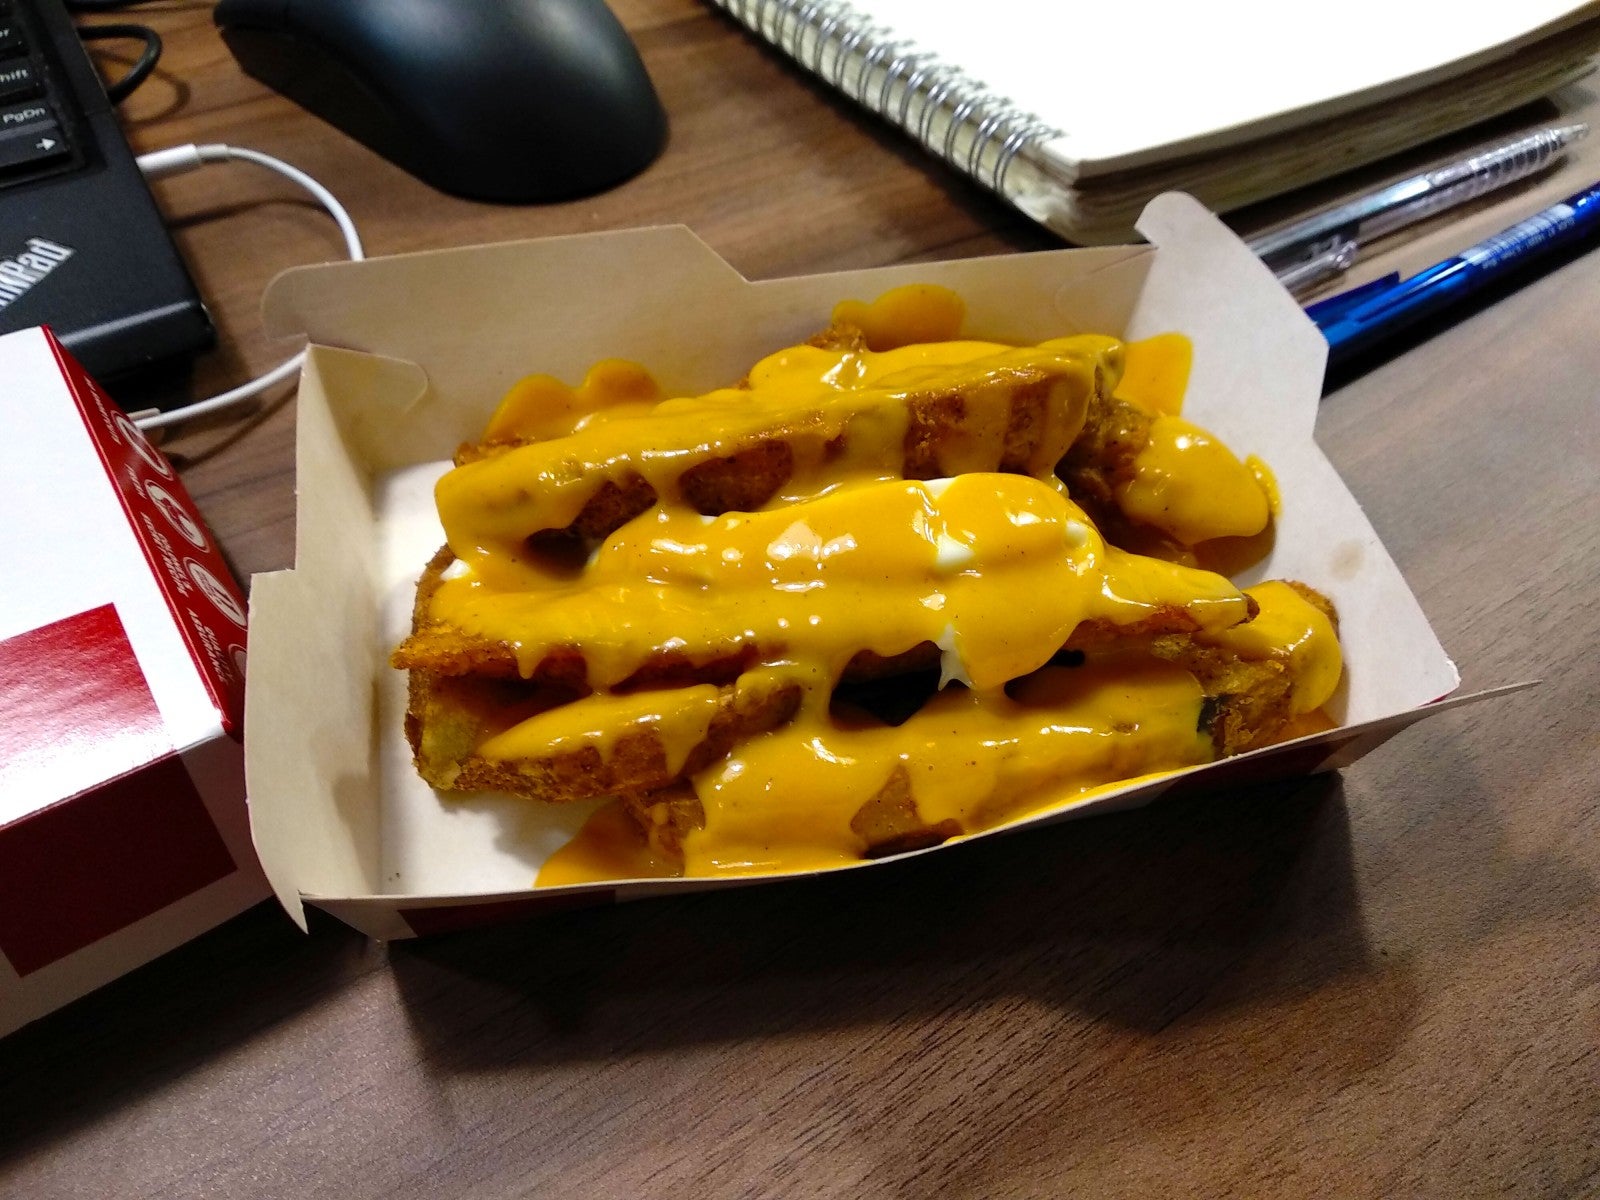 M Sians Can Now Claim Free Cheezy Wedges From Kfc Delivery Via Their App World Of Buzz